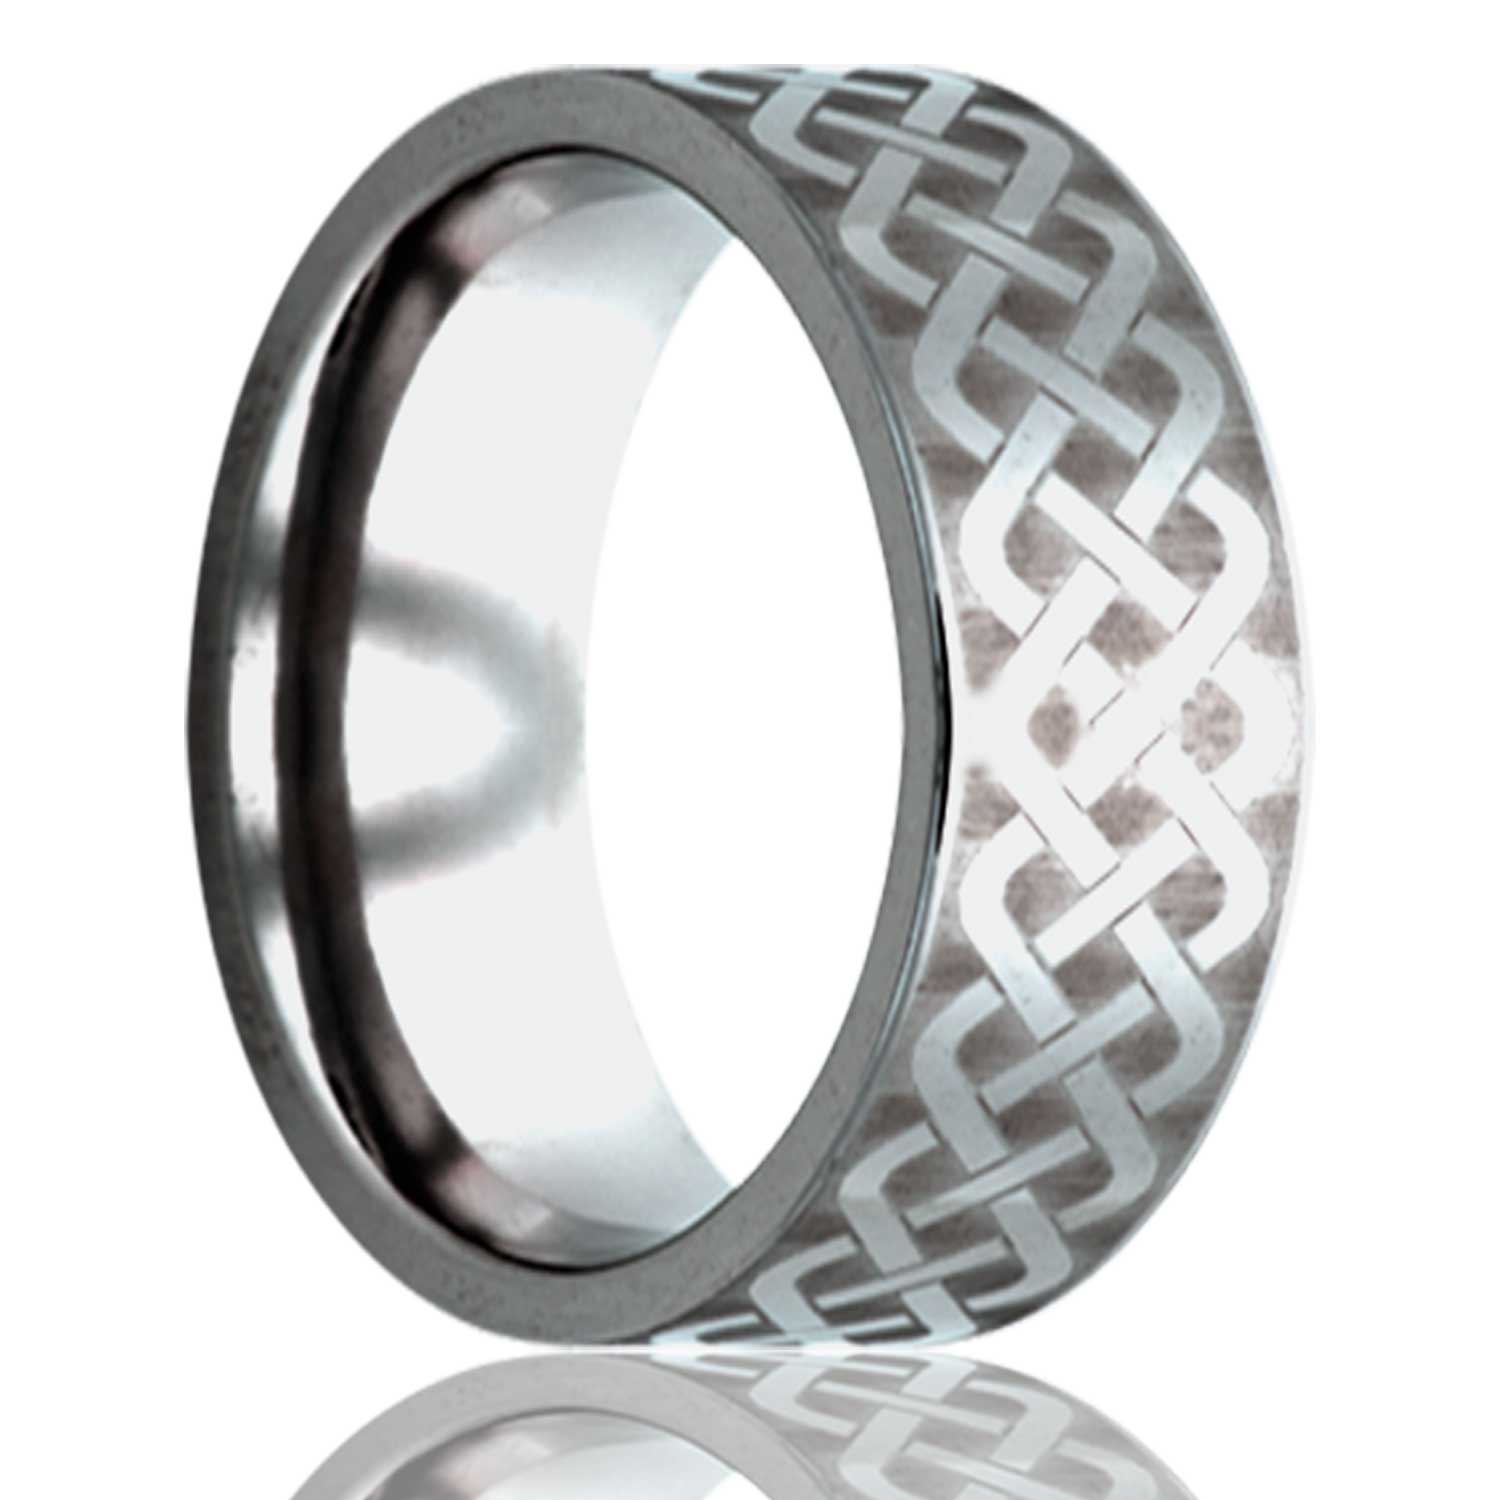 A celtic sailor's knot titanium wedding band displayed on a neutral white background.